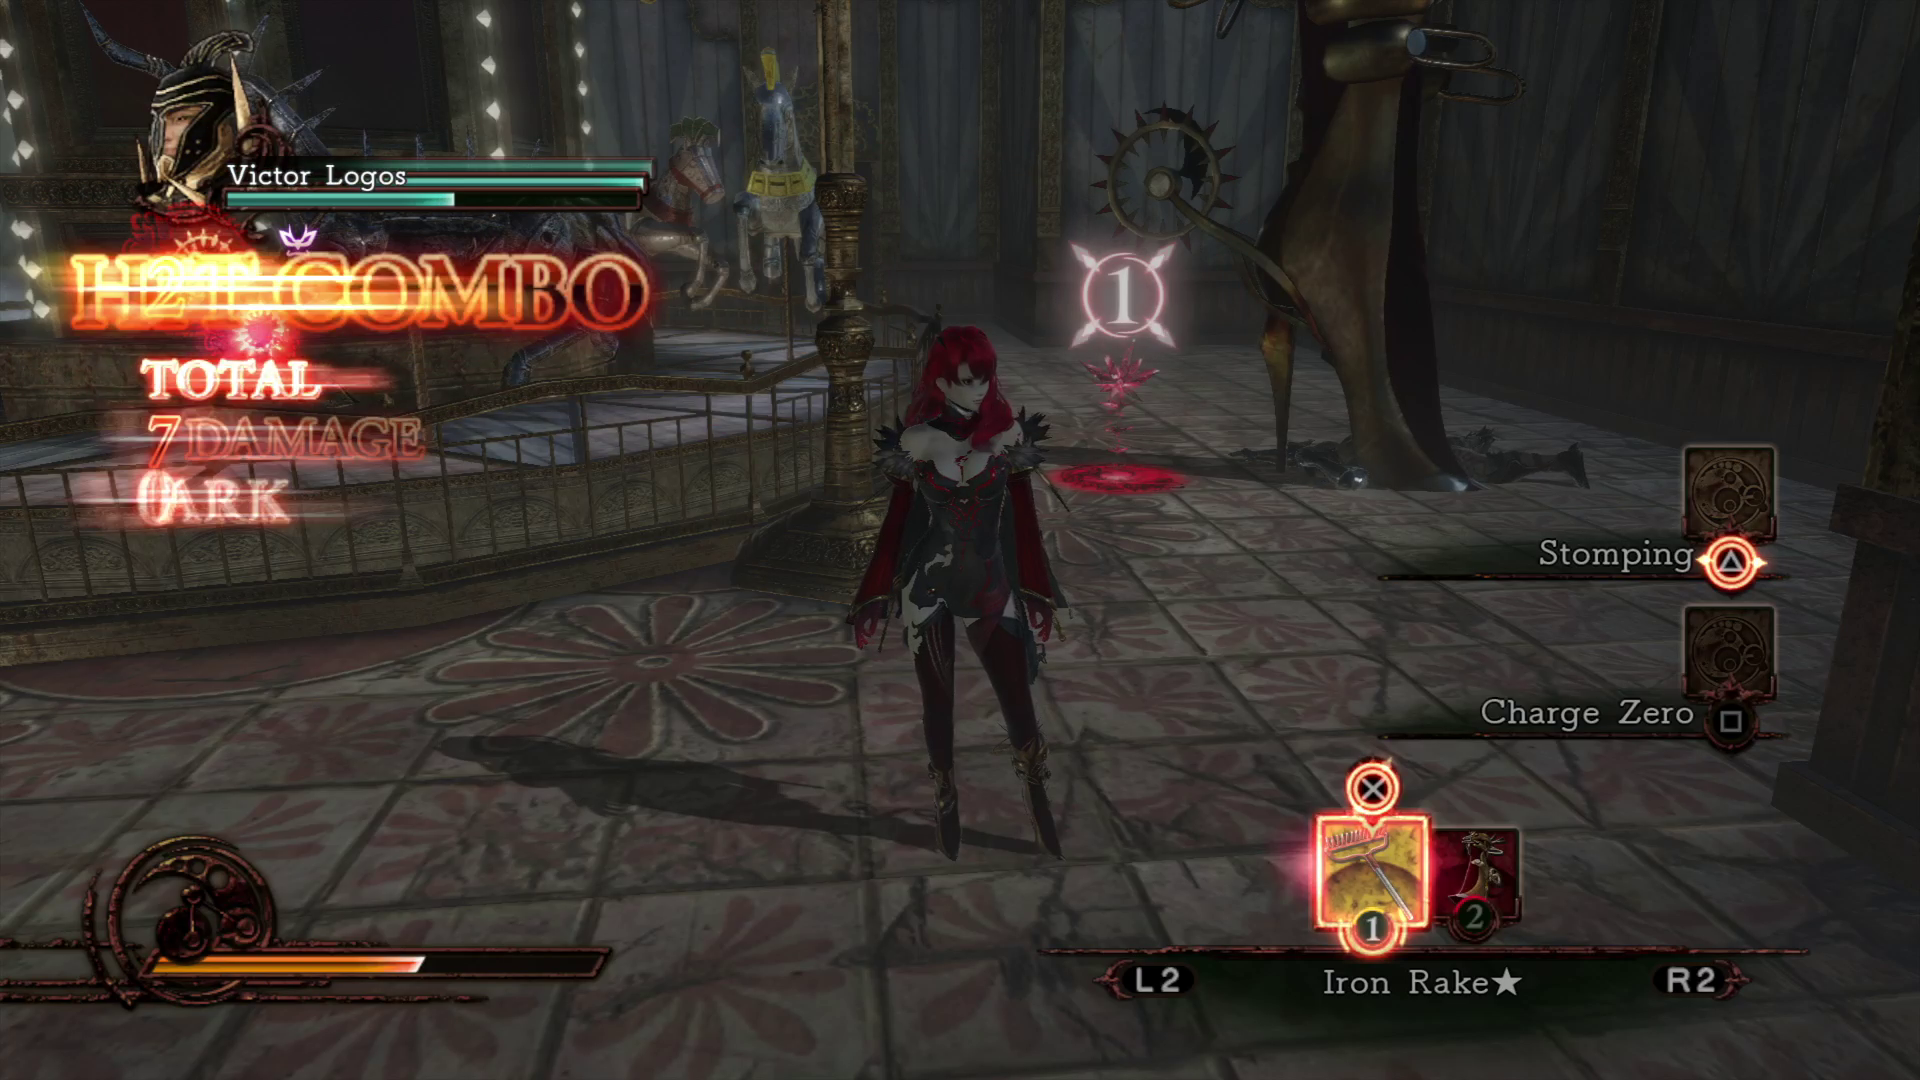 Deception IV - Velguirie posing while crushing an enemy under her giant heel.